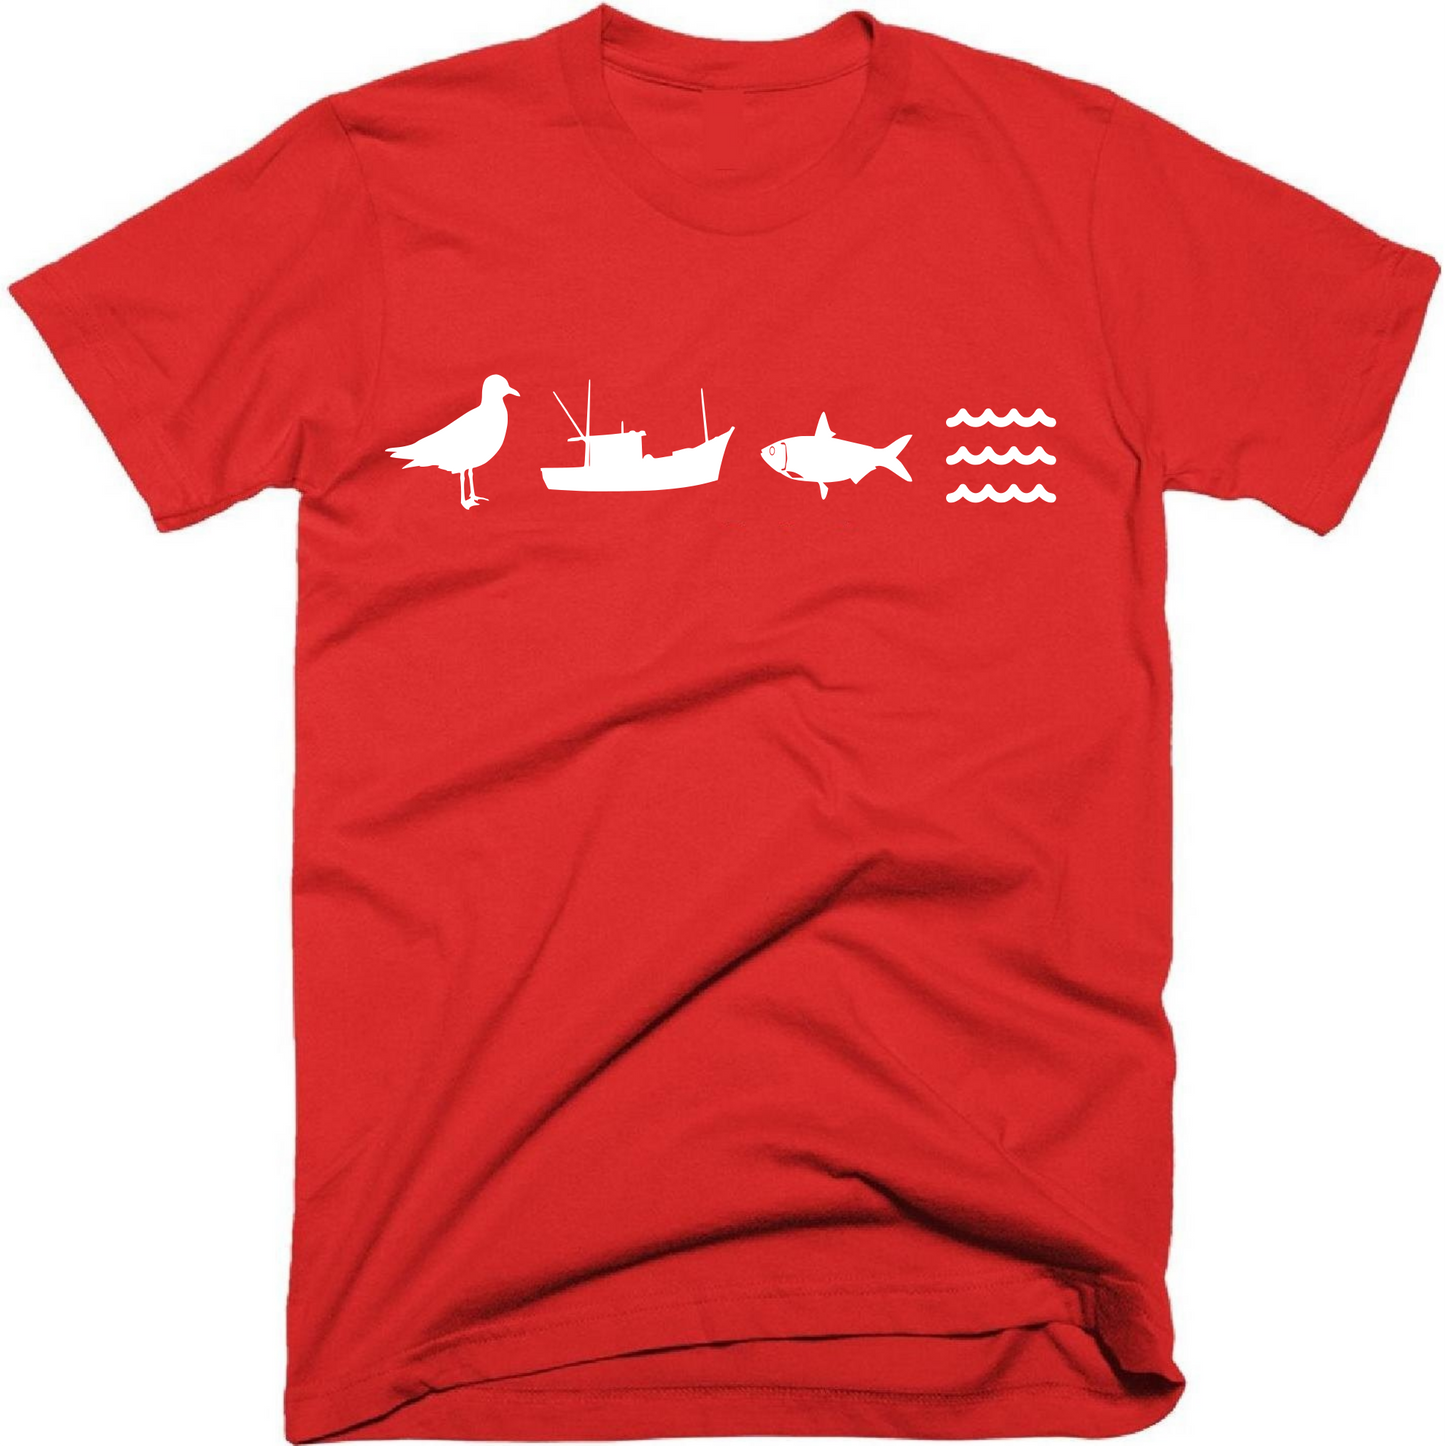 Eric Cantona - When seagulls follow the trawler it is because they think sardines will be thrown into the sea t-shirt.